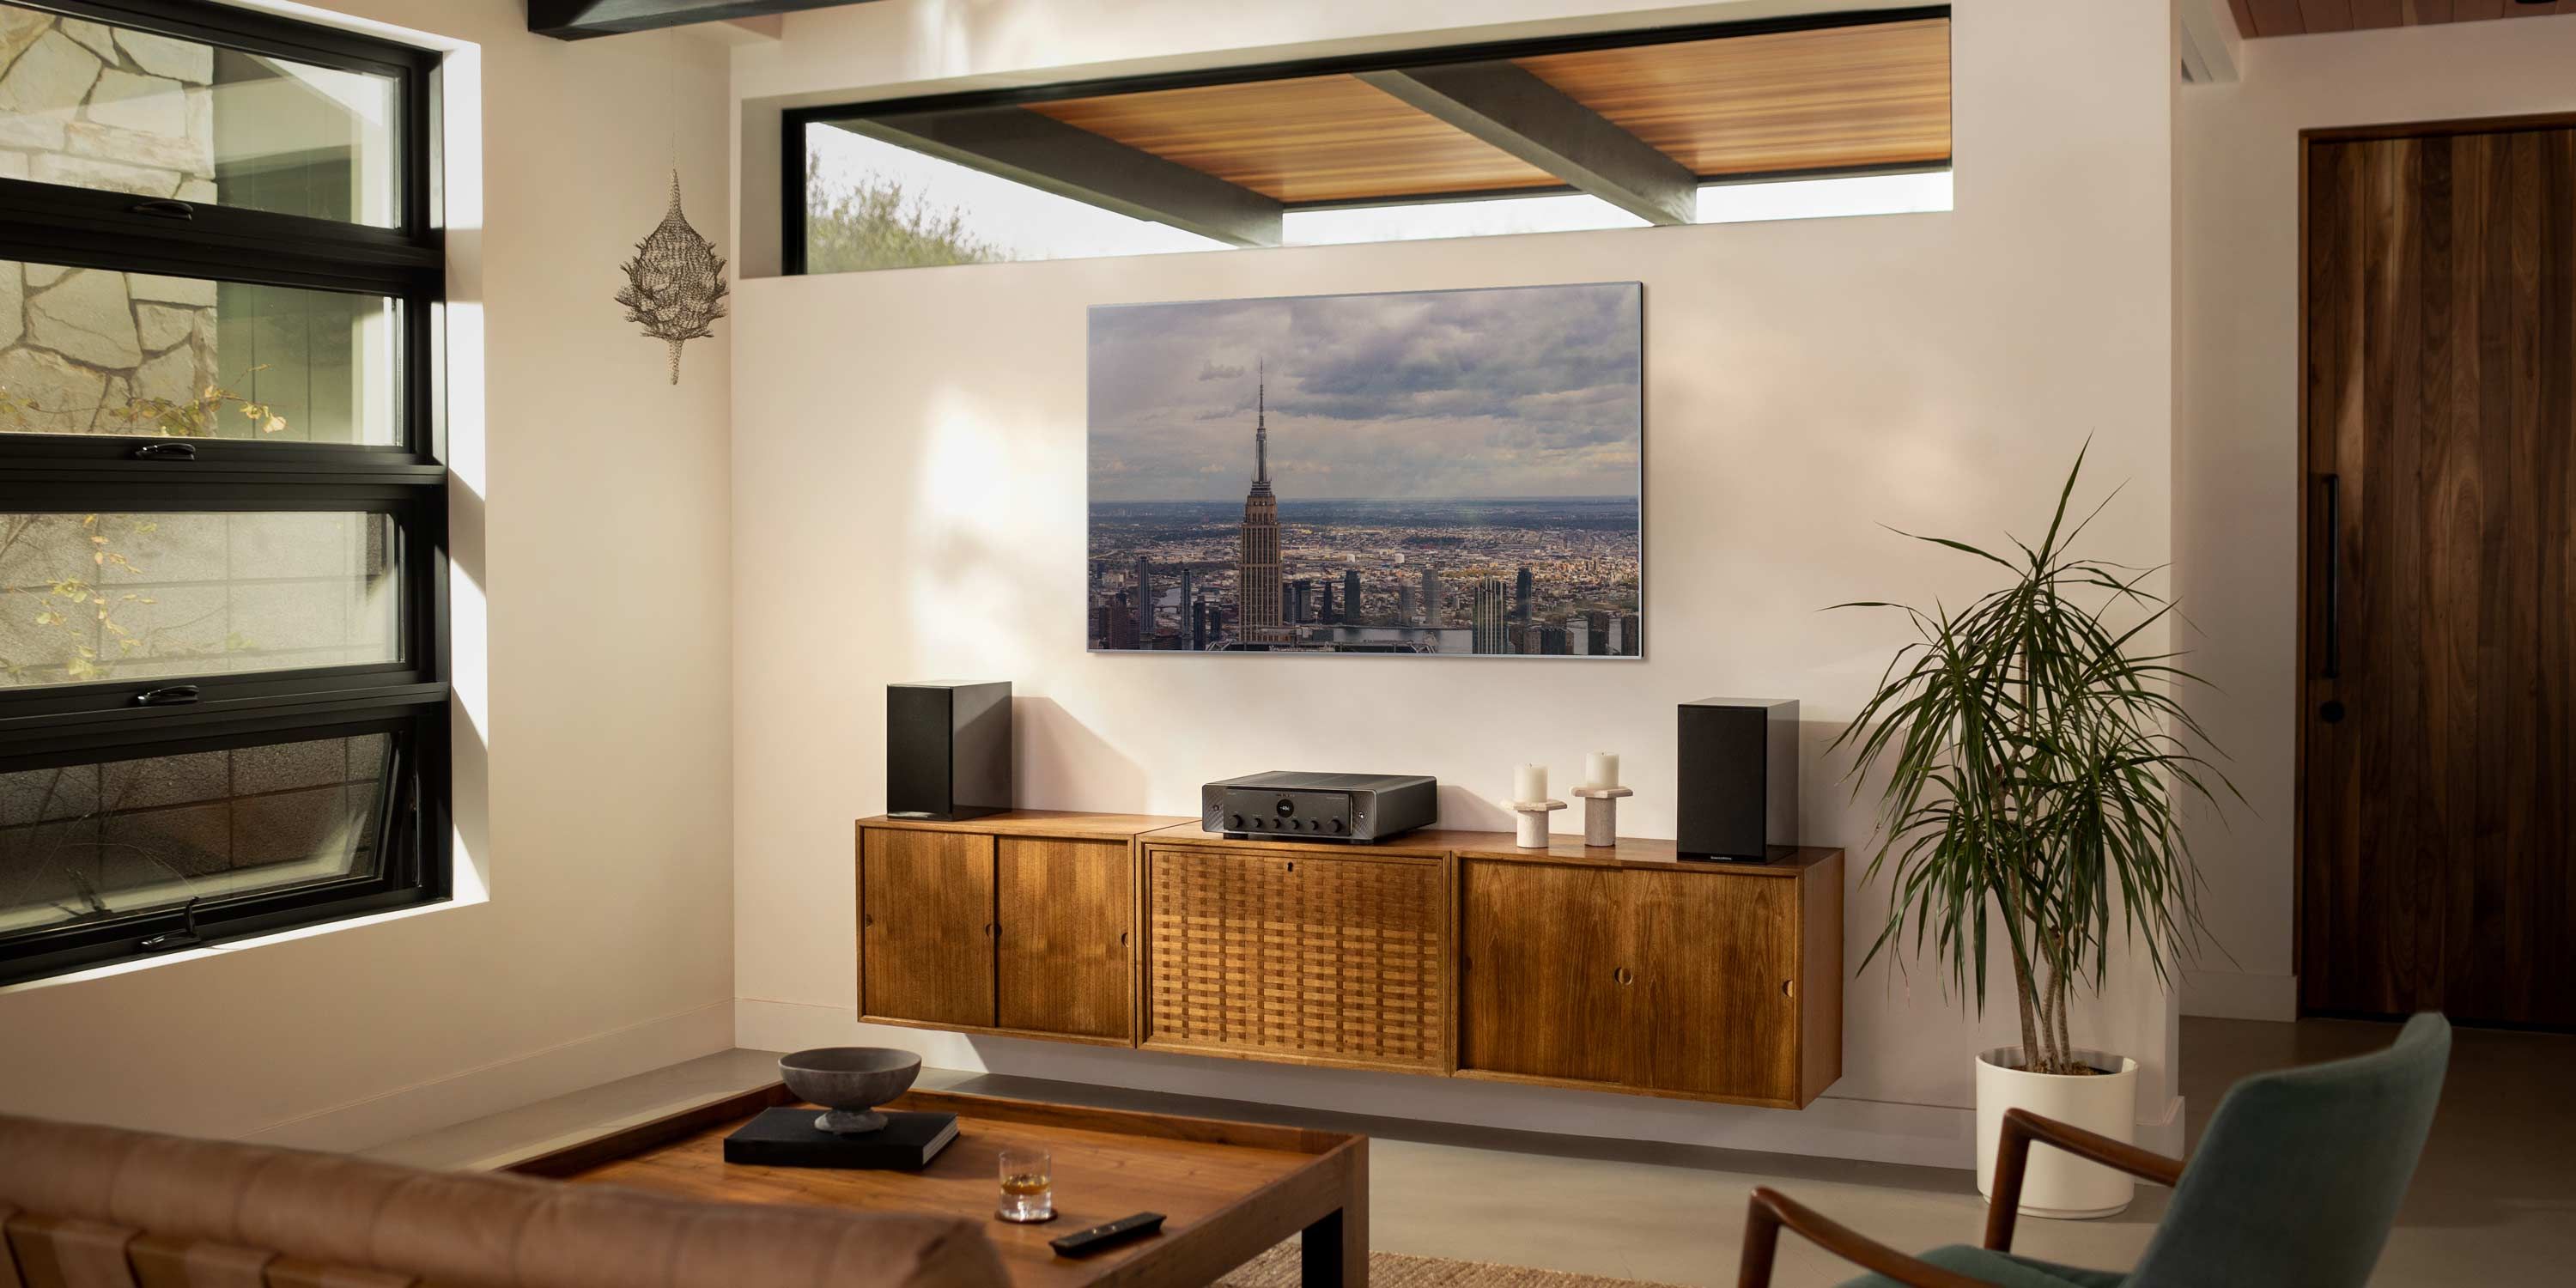 Marantz media room with wooden furniture and speakers